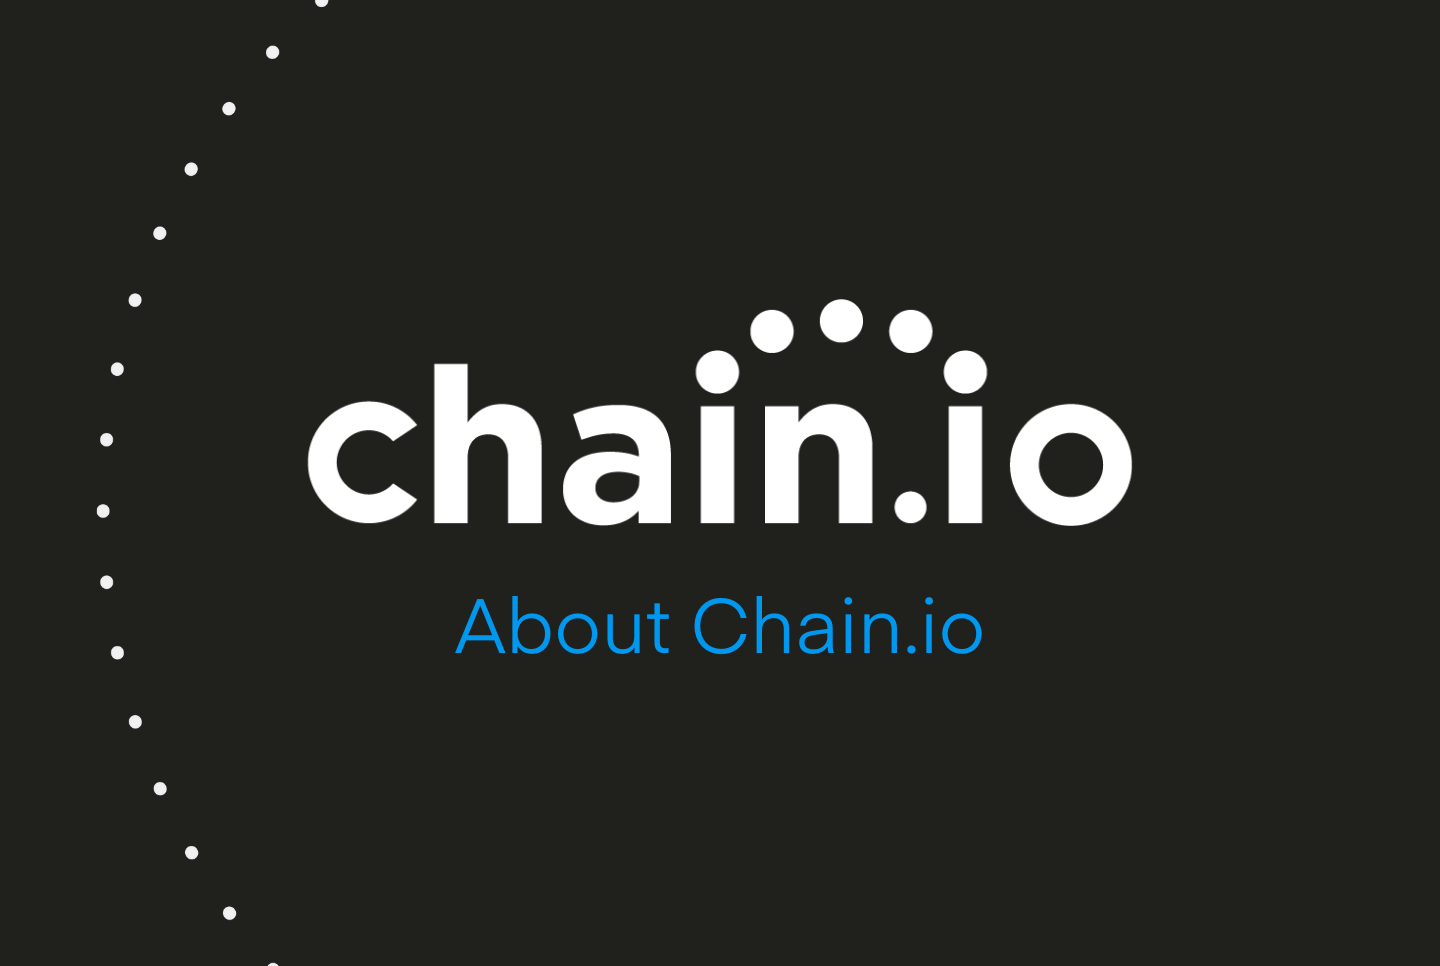 Chain.io is a cloud-based integration platform that connects partners across the global supply chain. Chain.io helps anyone involved in buying or moving products around the world work with supply chain vendors, customers, and software platforms more efficiently.  With logistics expertise built into the heart of its software, Chain.io plugs into any ecosystem seamlessly and makes sure the right data is going to the right people at the right time. Customers leverage Chain.io’s network to optimize critical business processes.  Chain.io shines when solving complex supply chain challenges and problems that require integrating multiple types of technologies. 